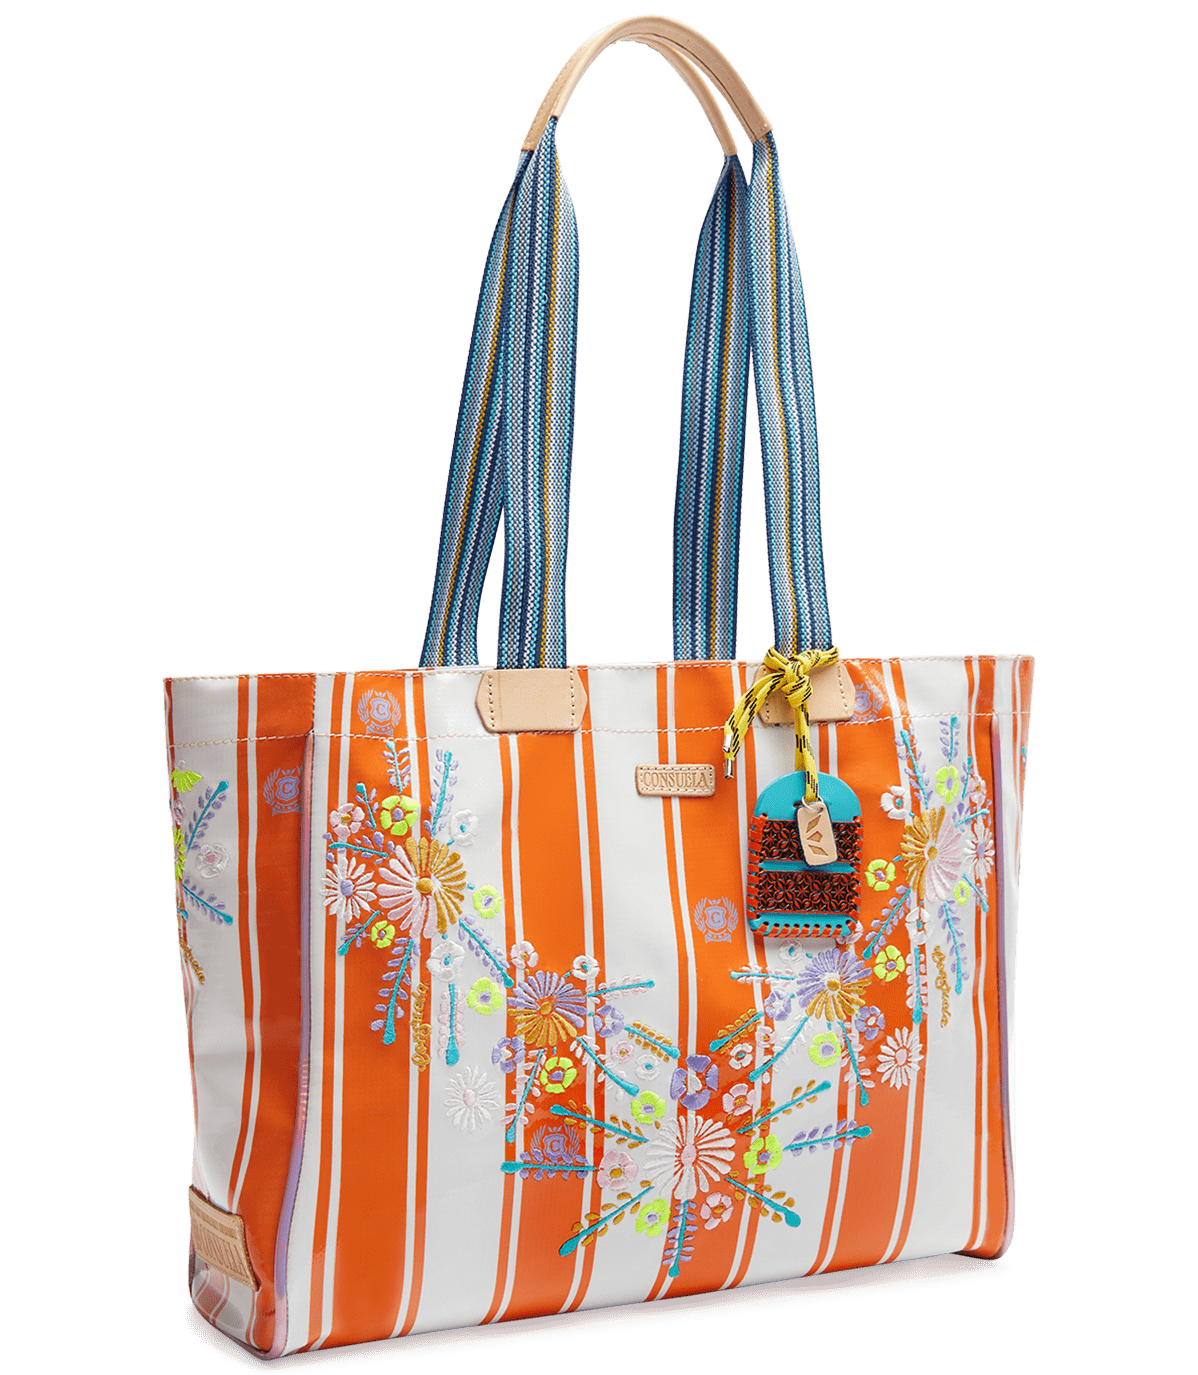 Consuela Style Consuela Style Yola Journey Tote - Little Miss Muffin Children & Home